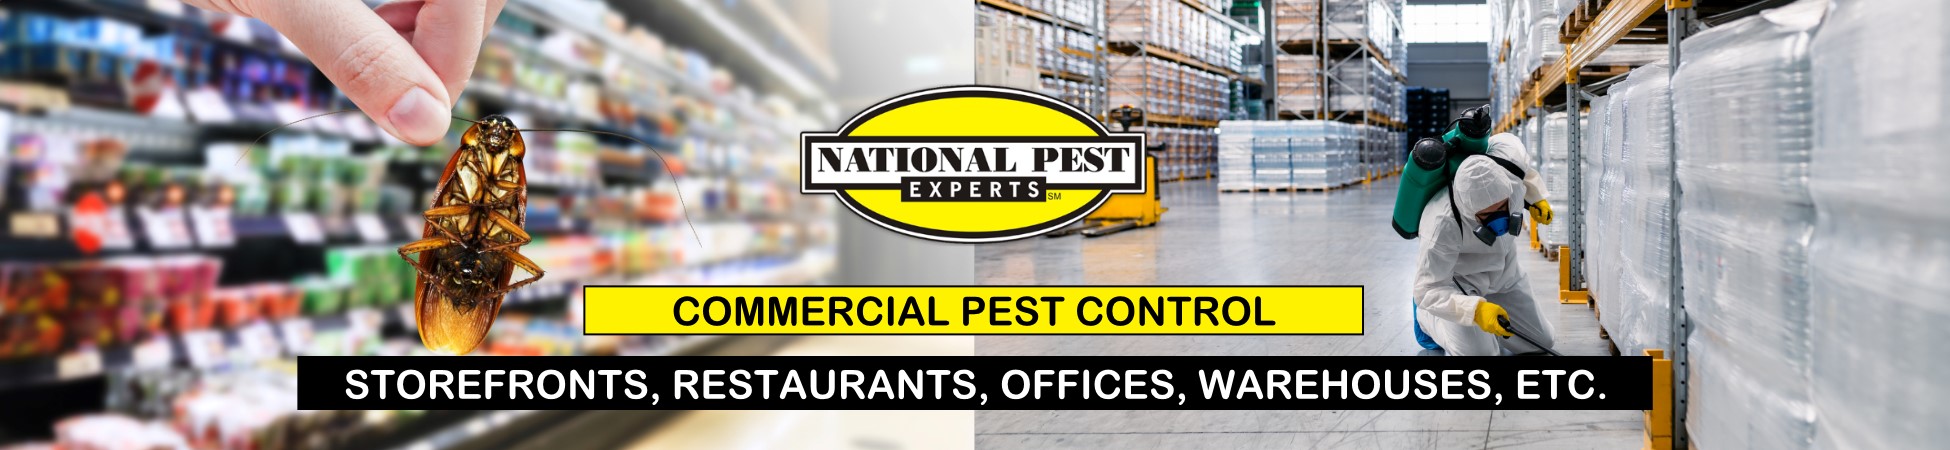 National Pest Experts - Commercial & Industrial exterminating and pest control in Huntington Station, NY